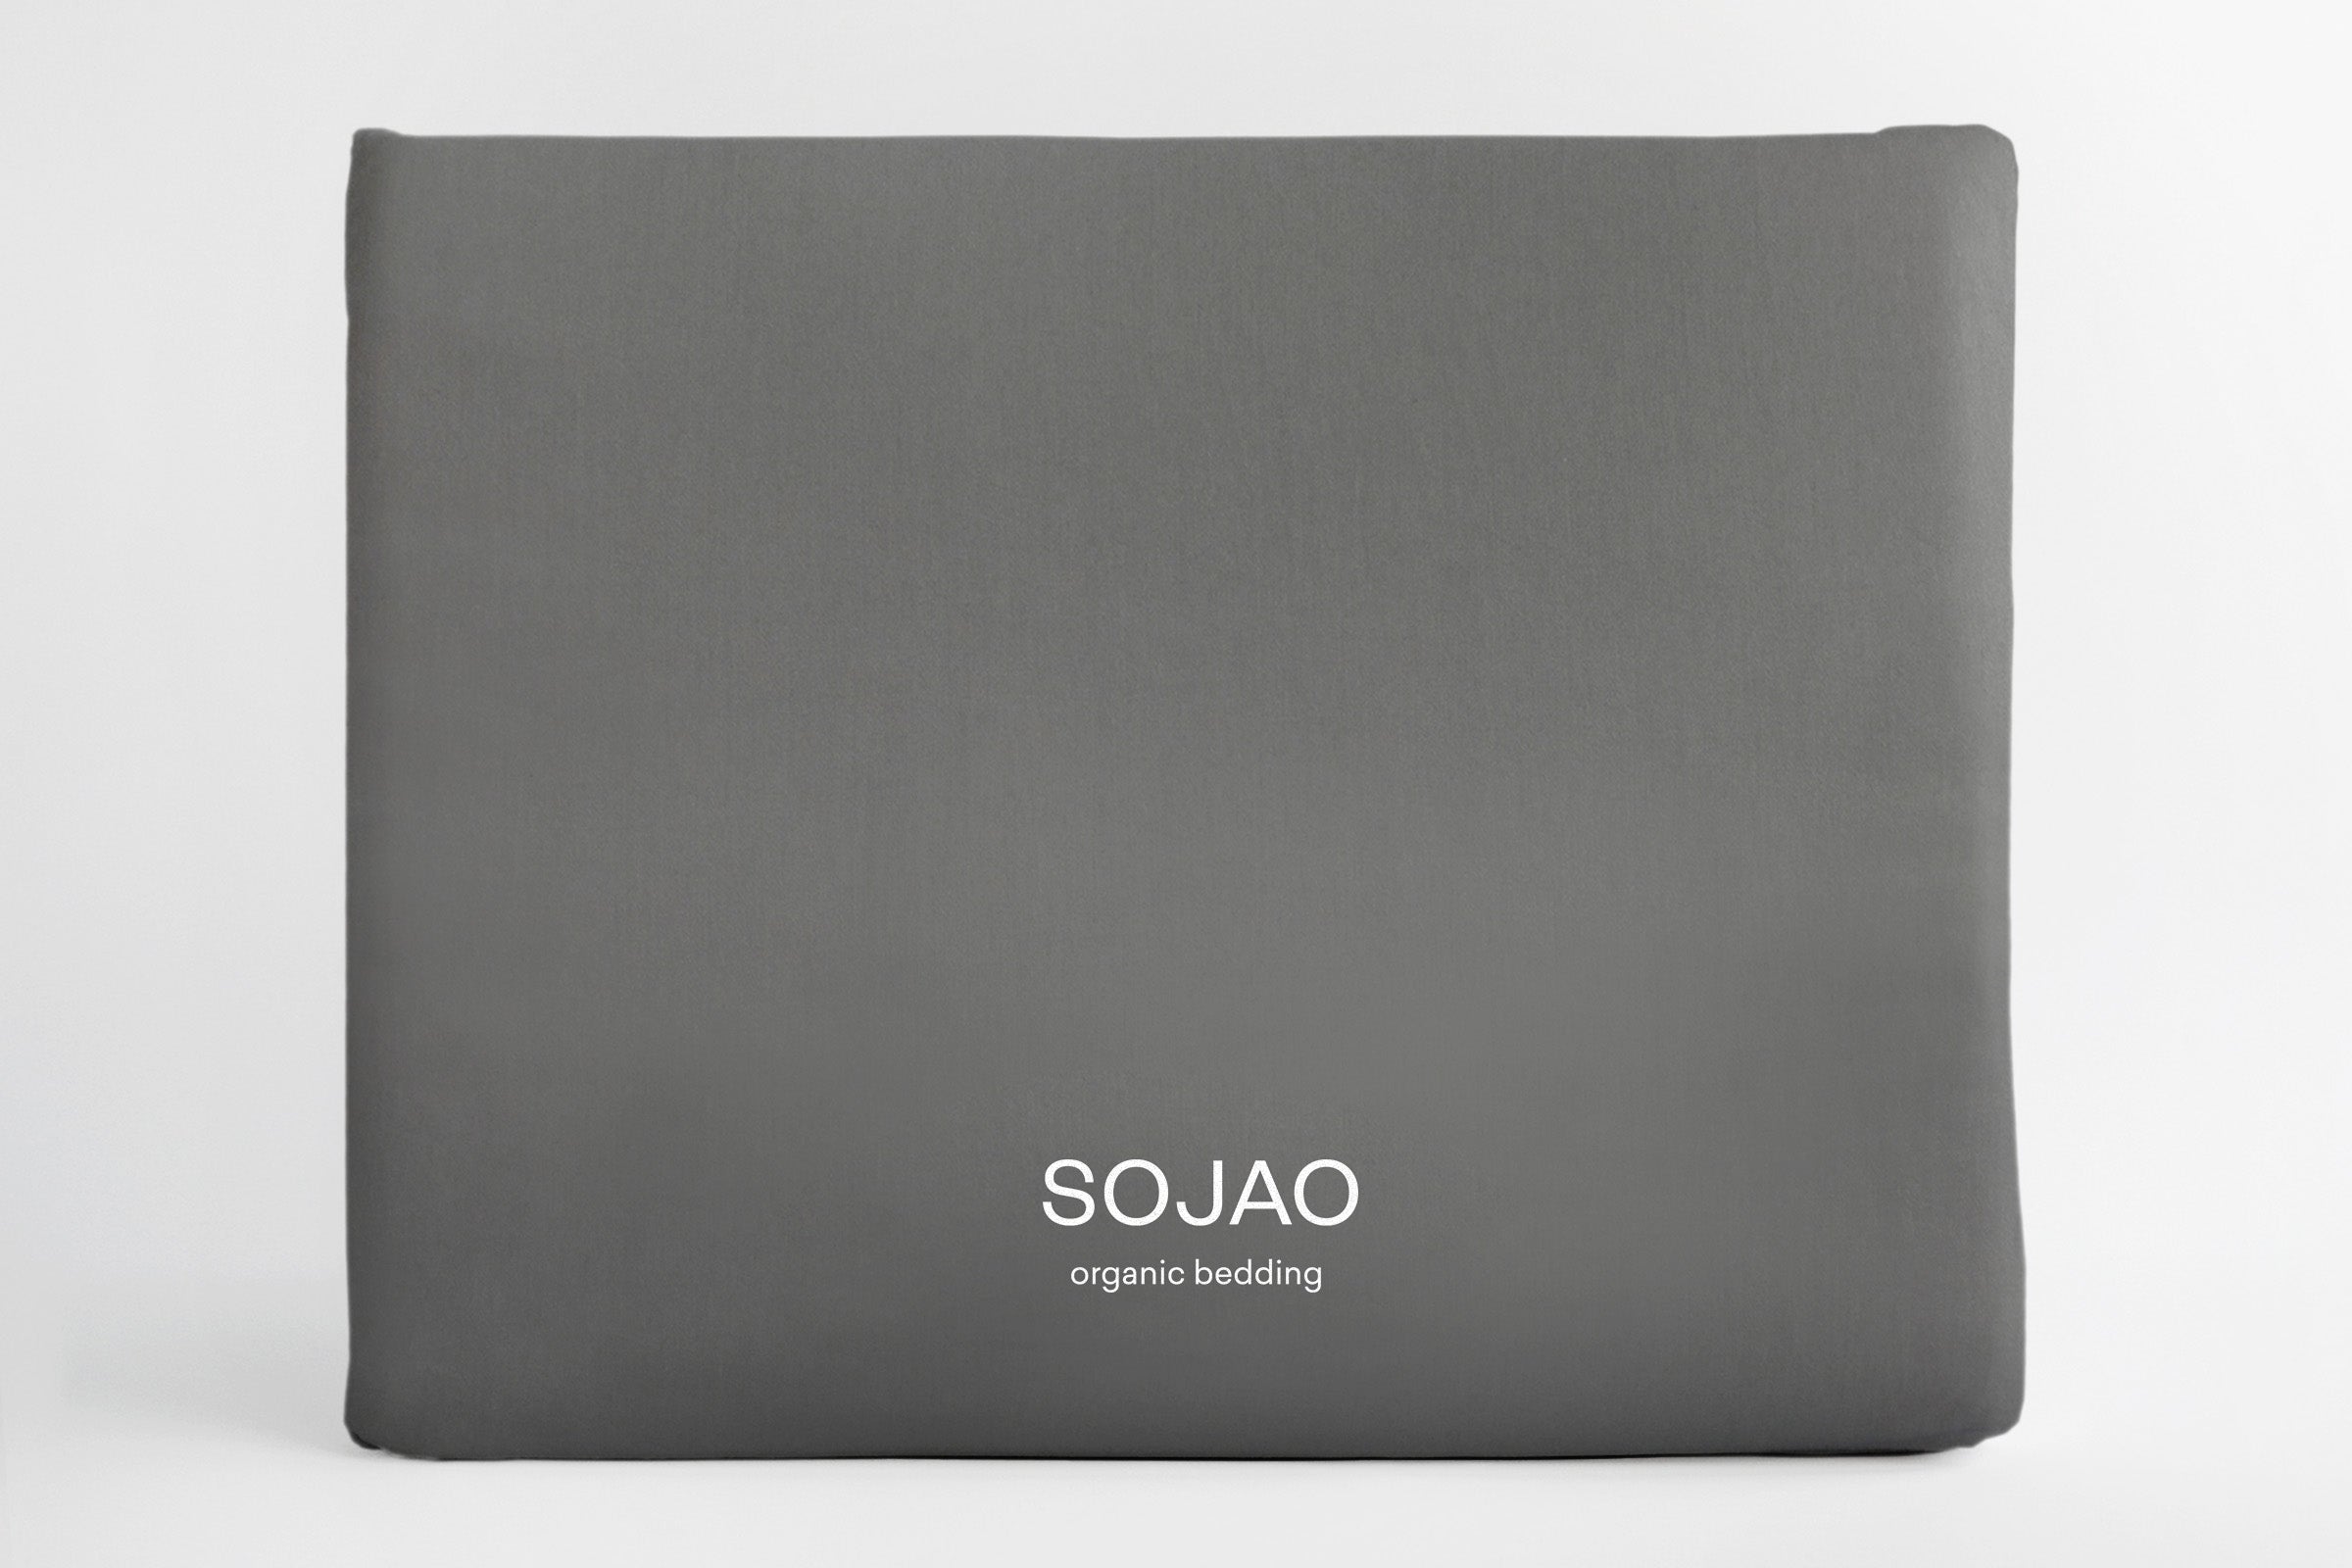 classic-stone-fitted-sheet-dust-bag-by-sojao.jpg